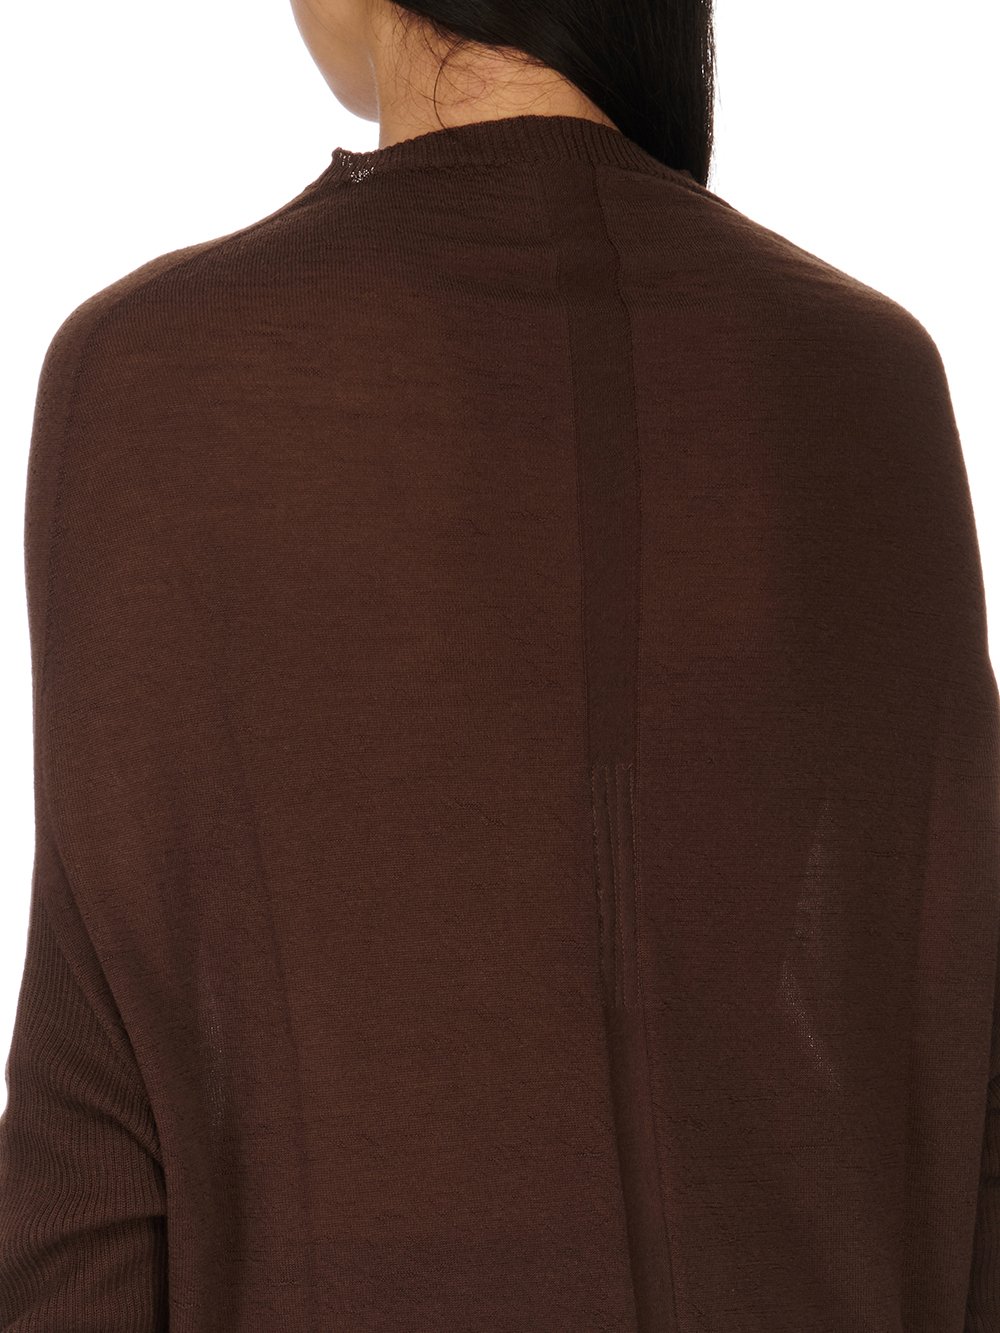 RICK OWENS FW23 LUXOR CRATER KNIT IN BROWN LIGHTWEIGHT RASATO KNIT